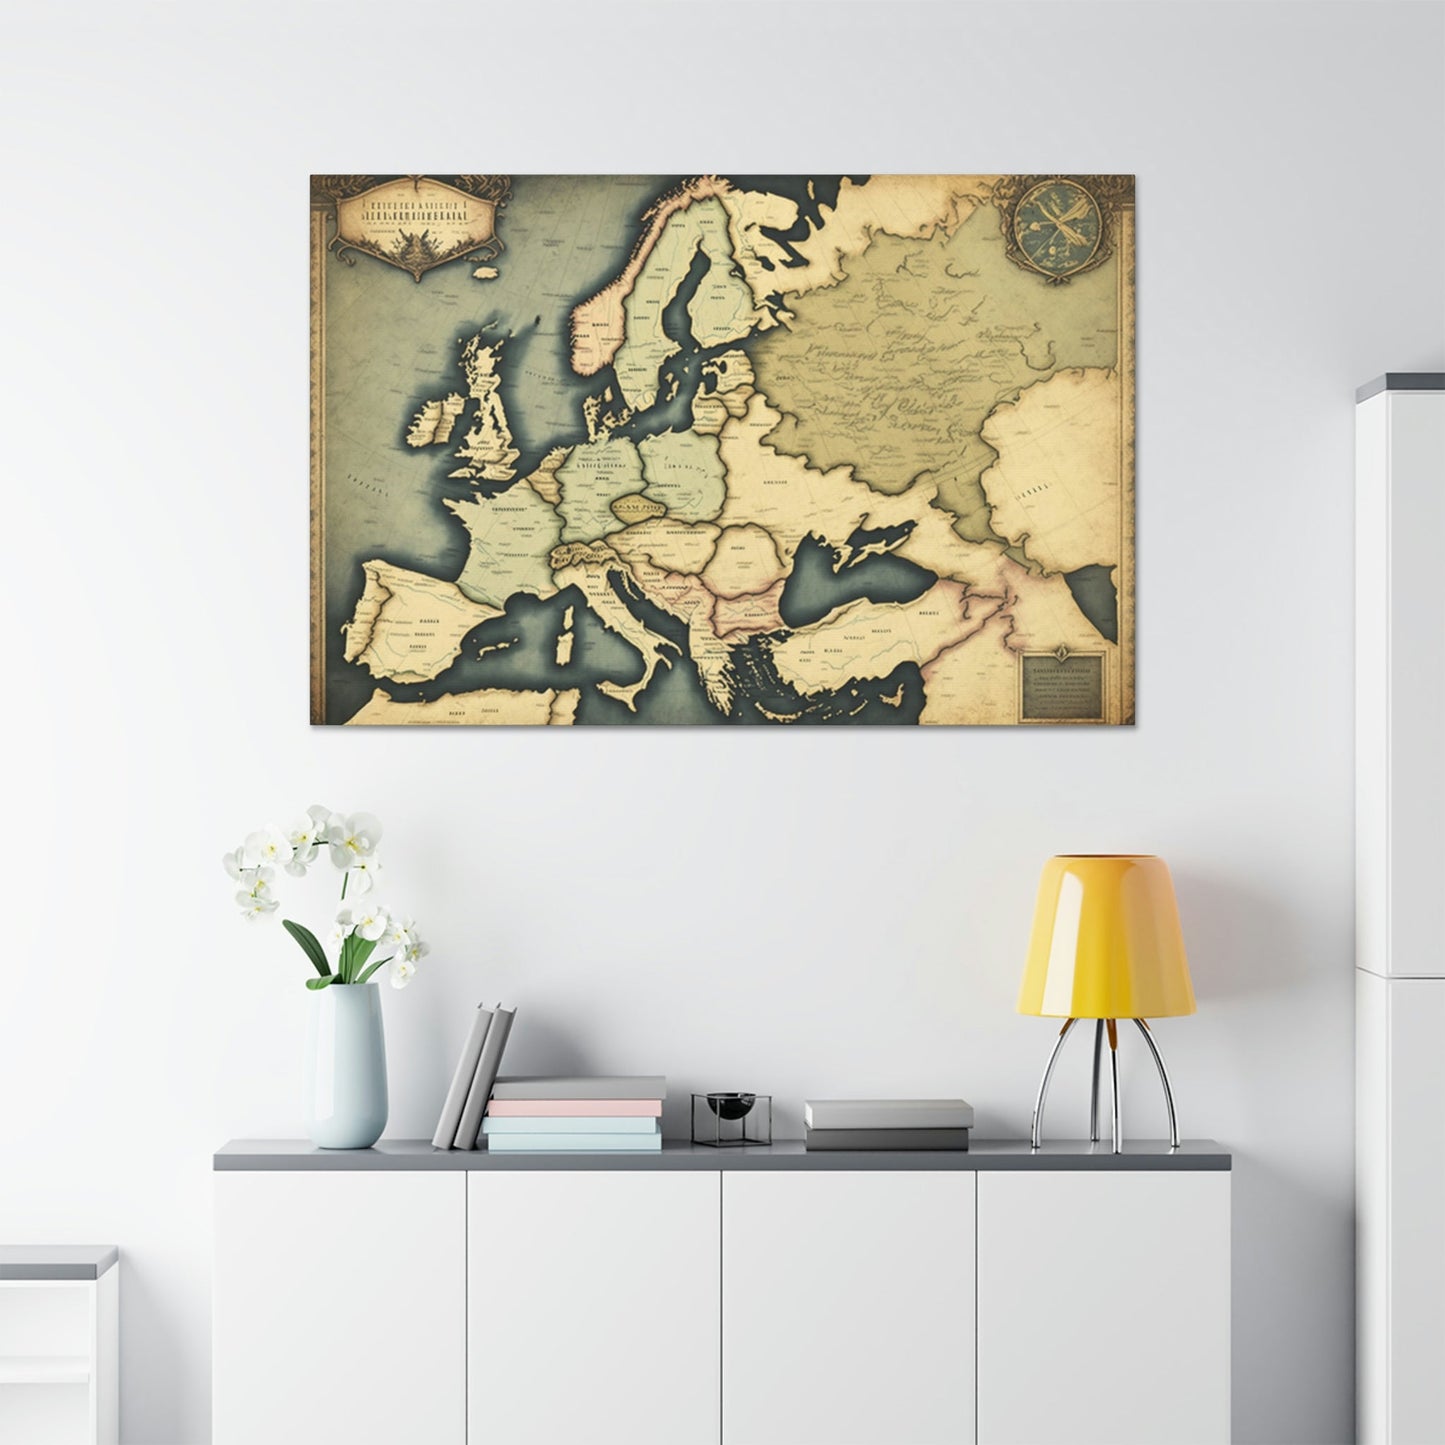 Antique Adventure: A Painting of Vintage Maps on a Journey